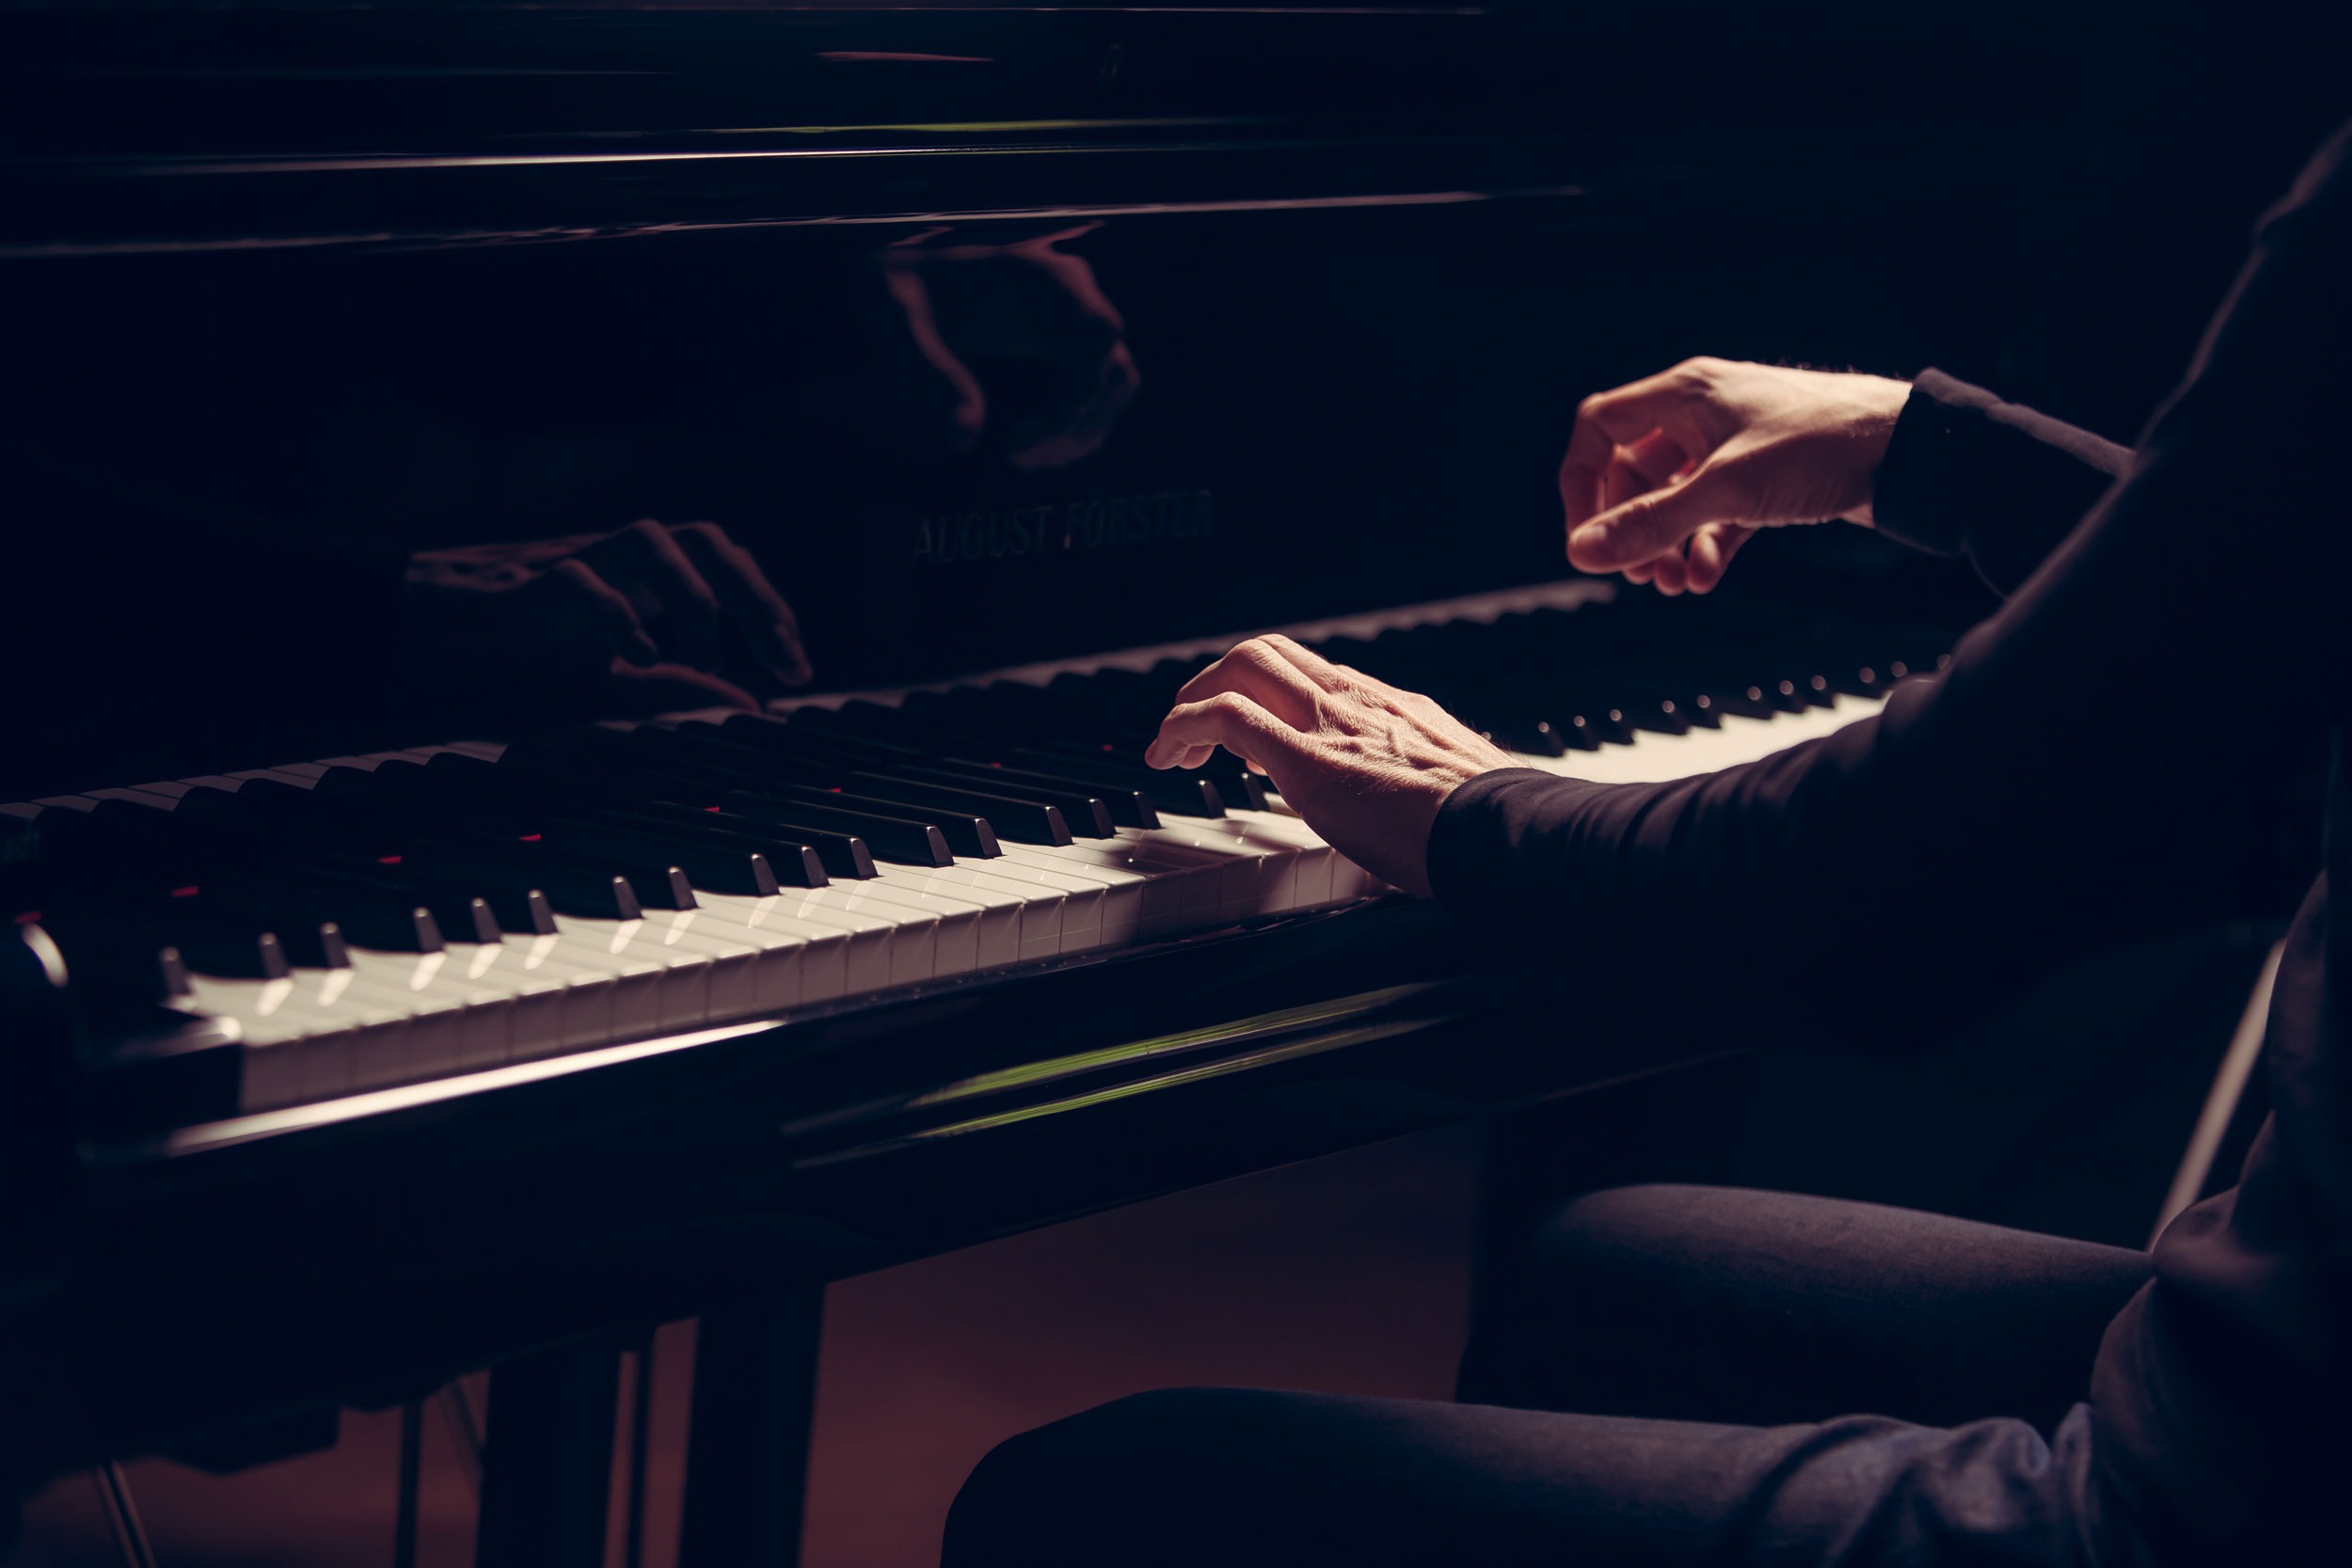 Fortepiano: Gregor Vidovic, Professional German Pianist, The Member Of The Lions Club International. 2500x1670 HD Wallpaper.